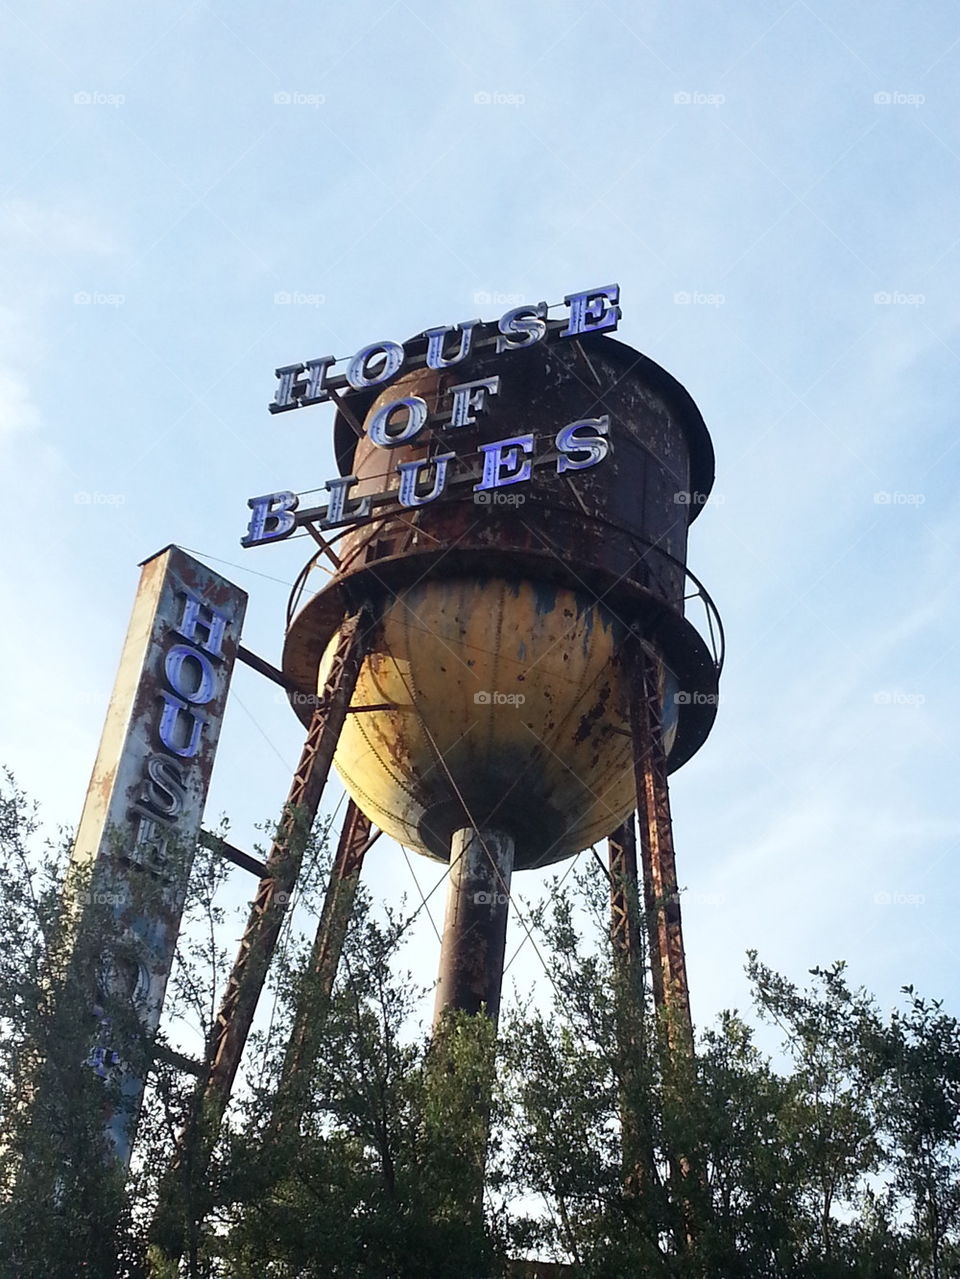 house of blues water tower